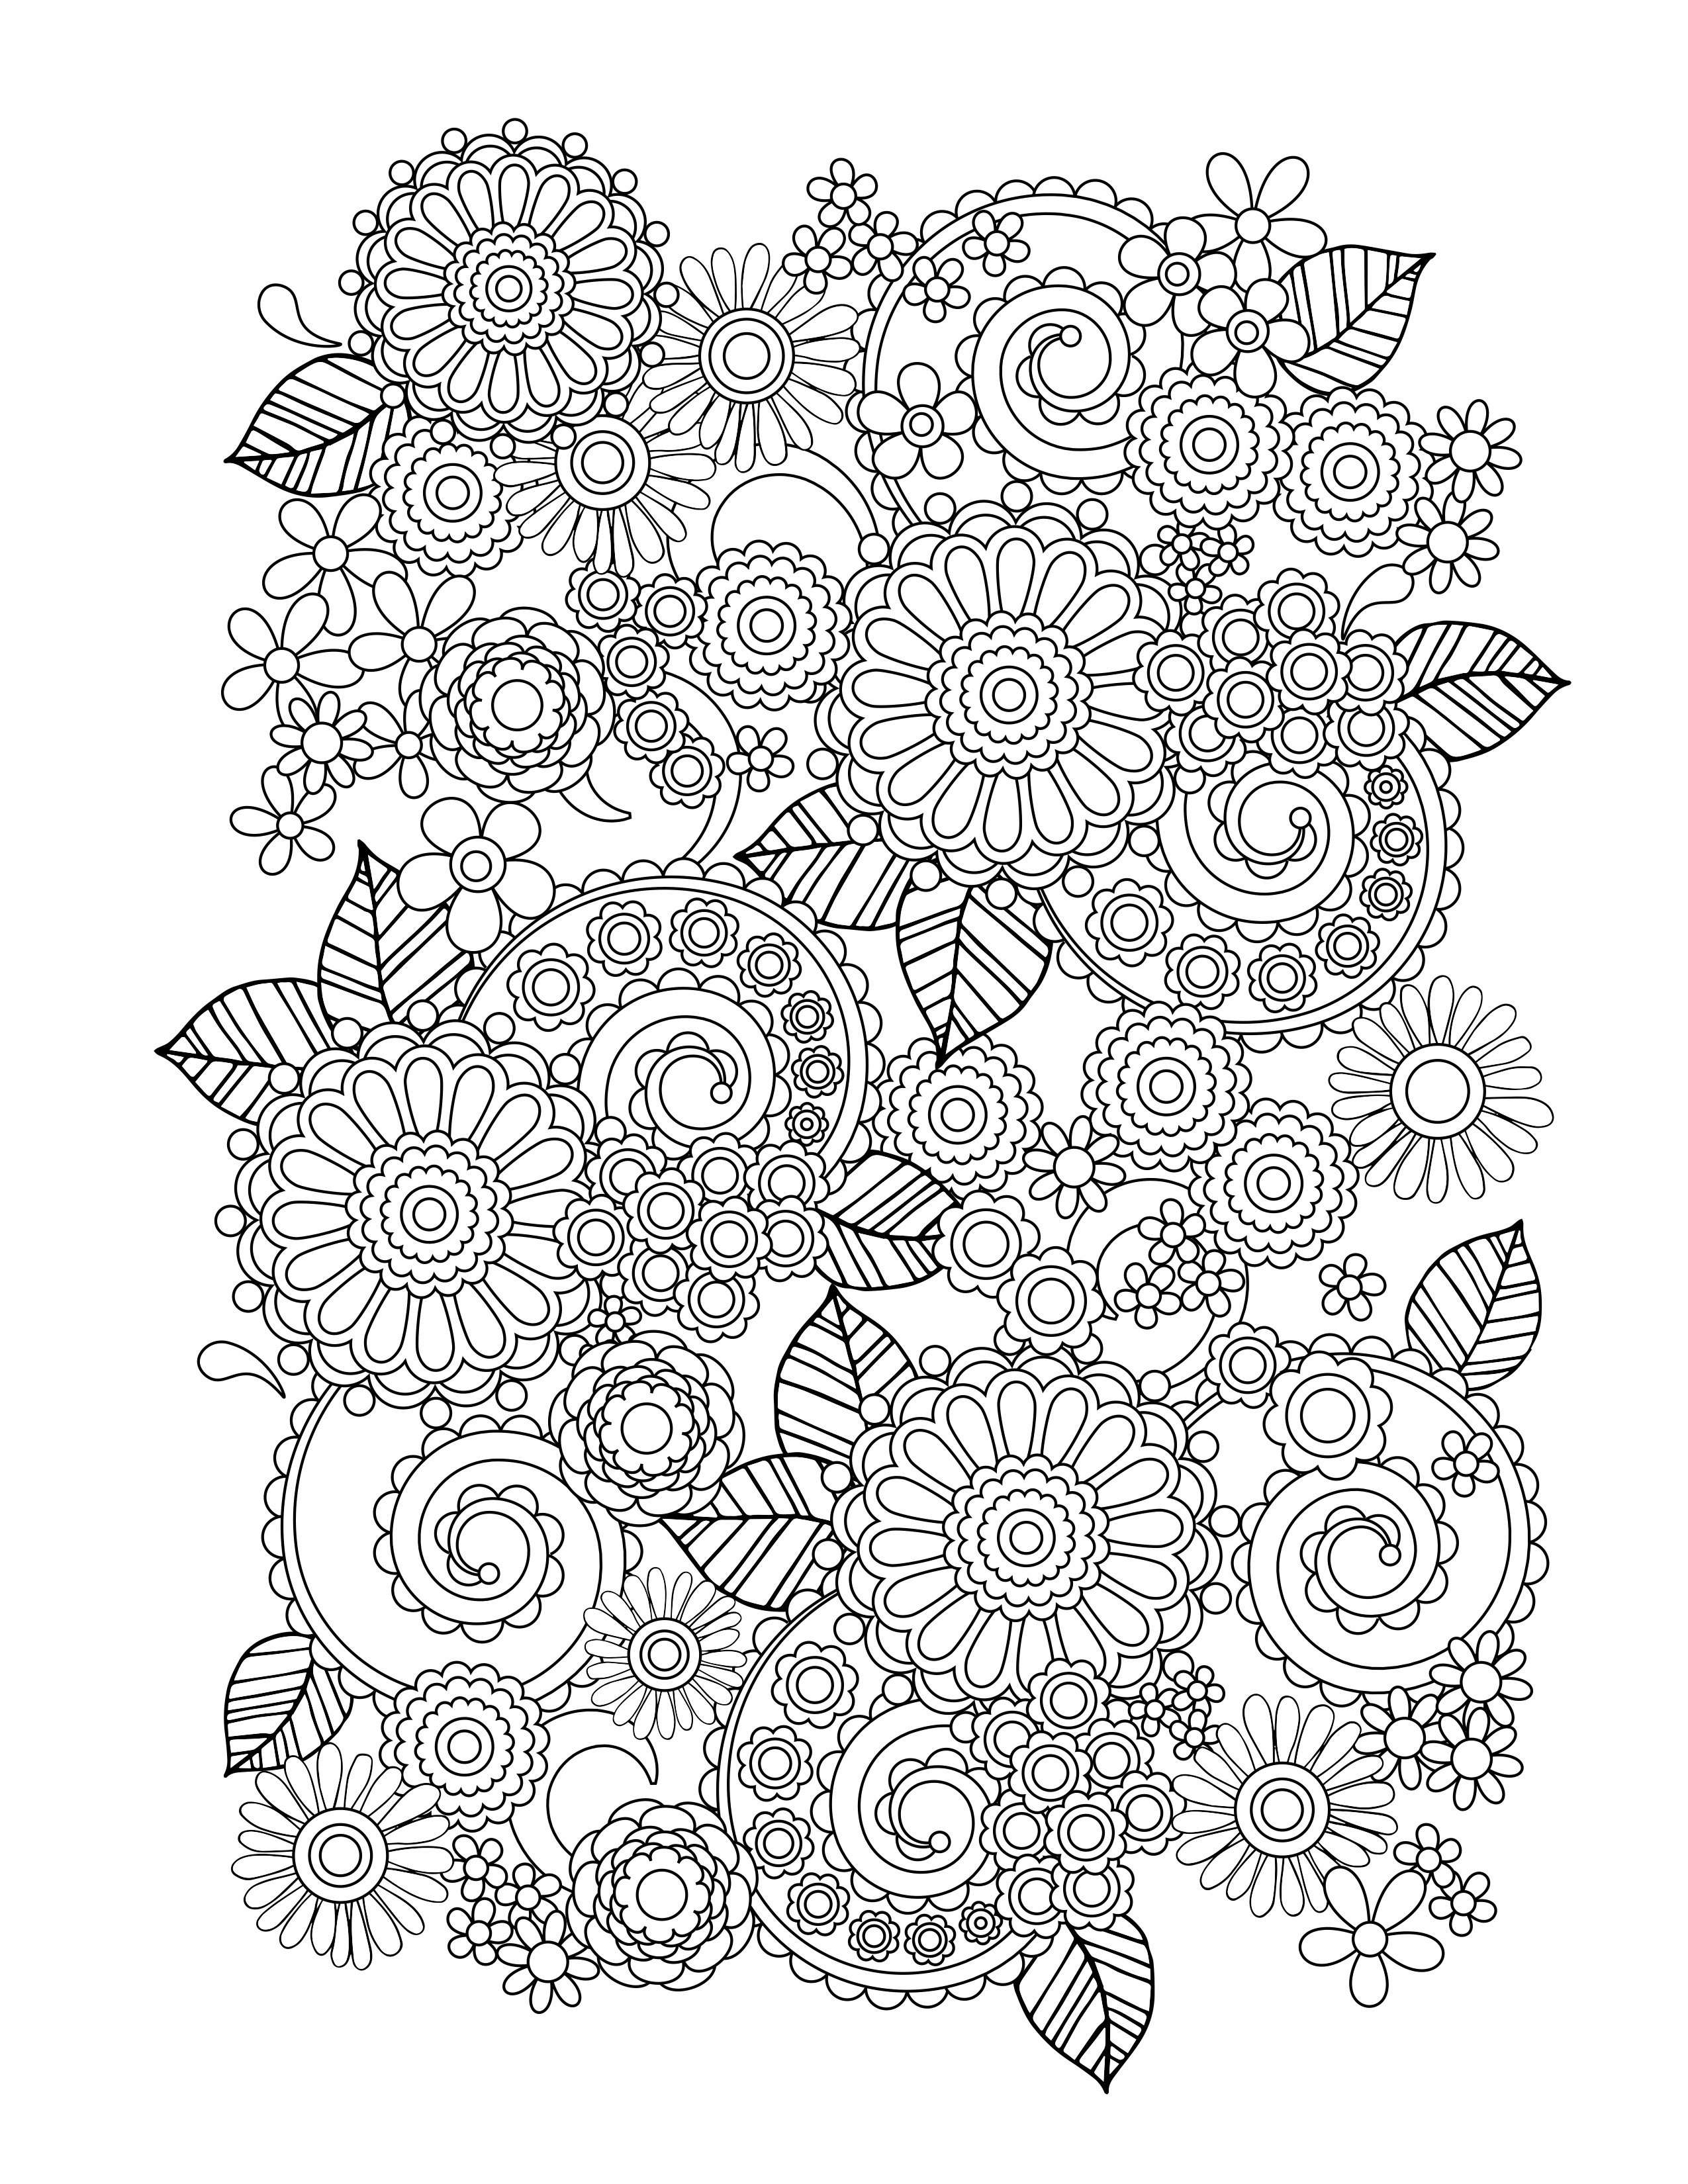 Flower coloring pages for adults